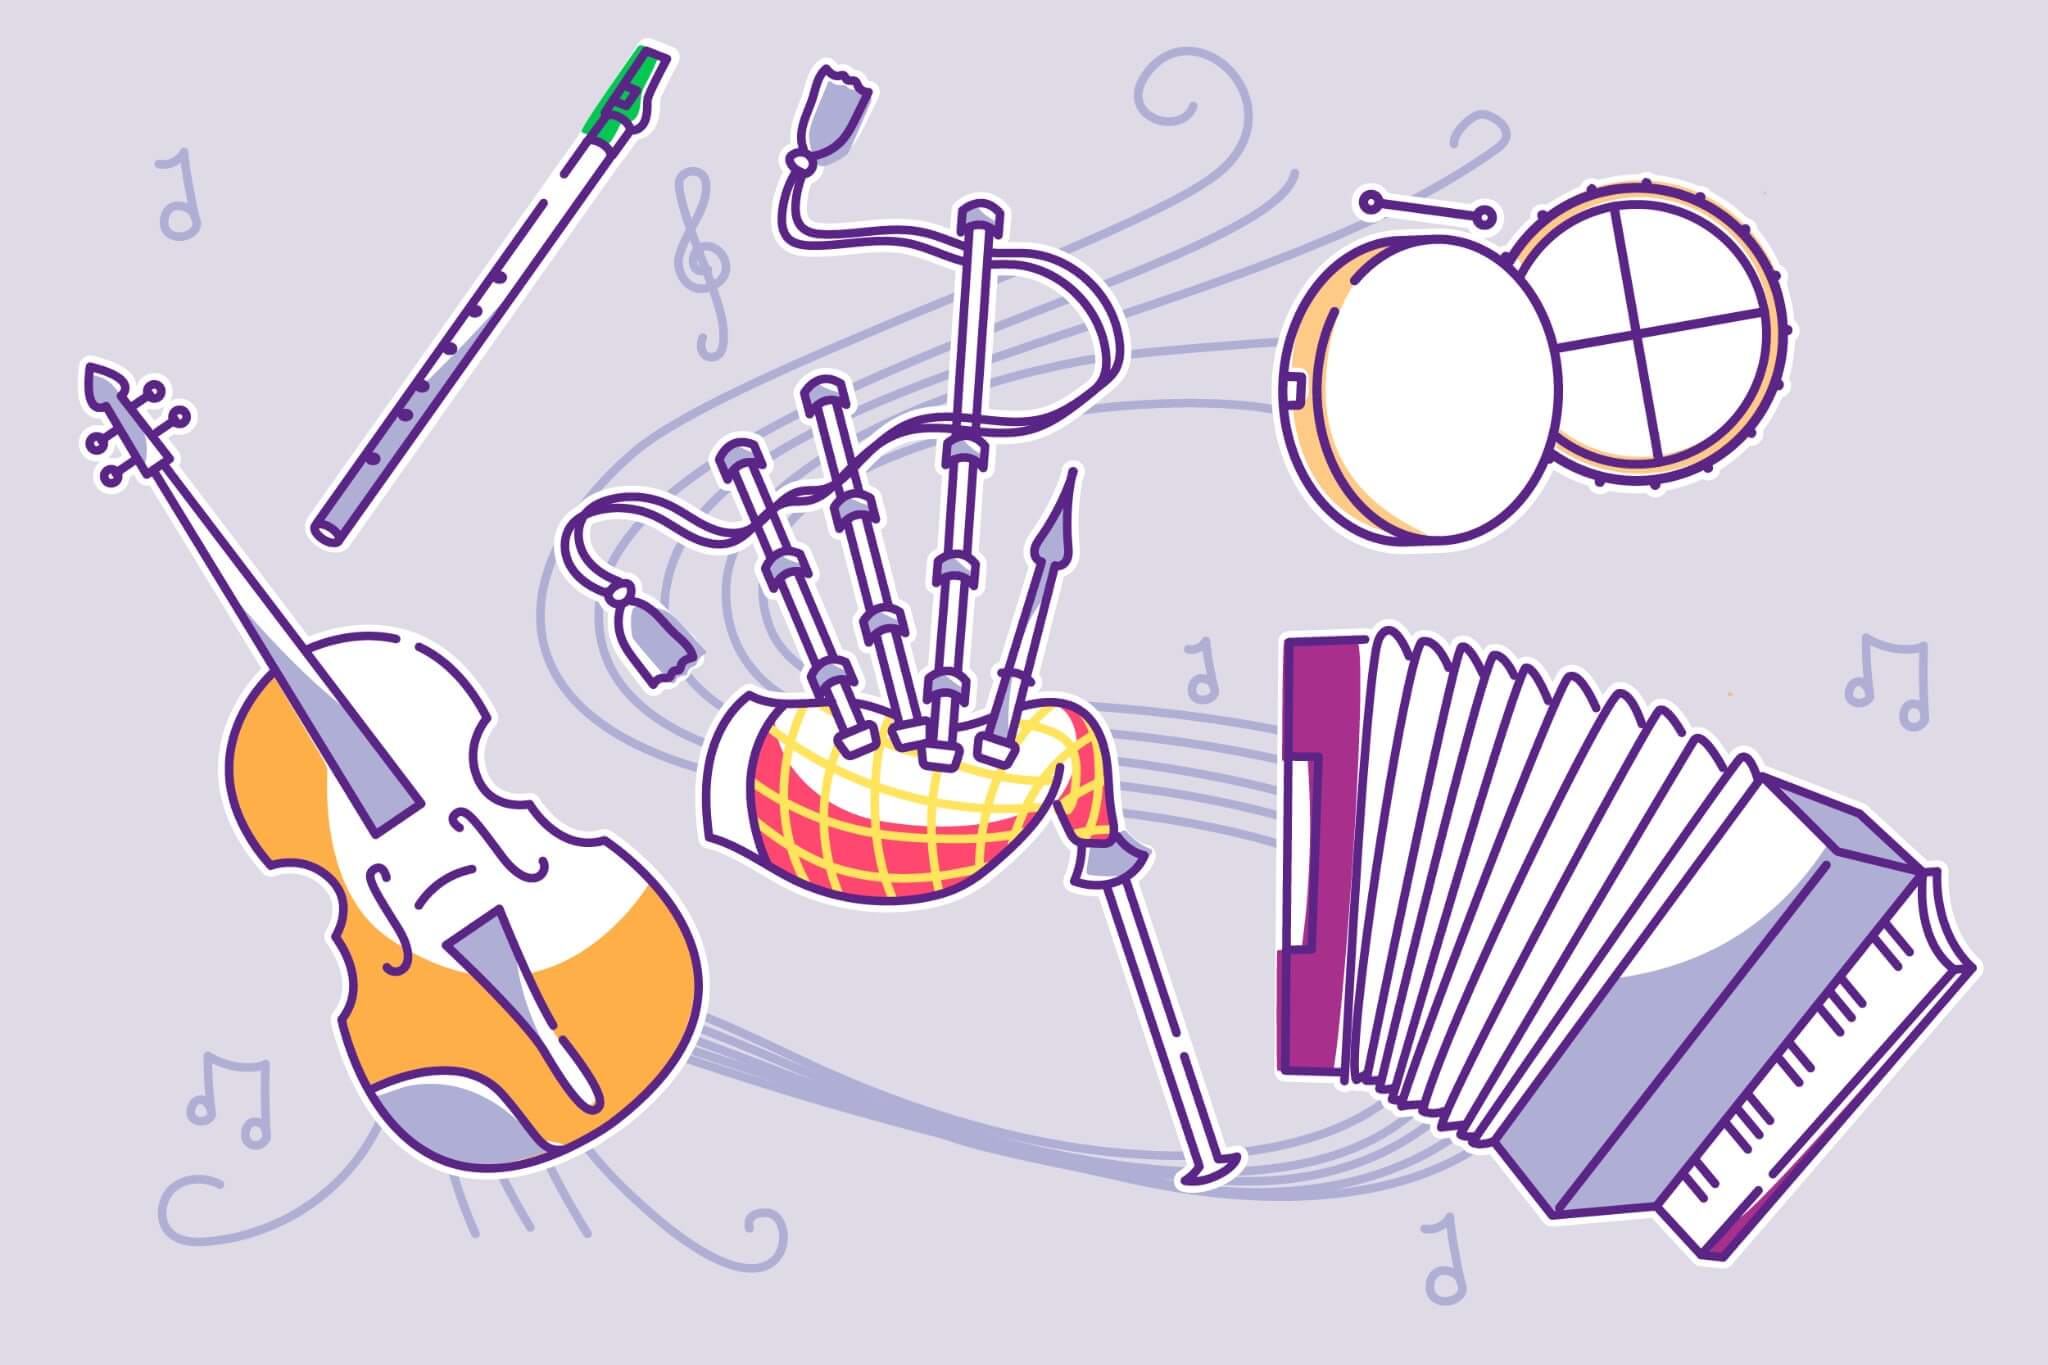 Scottish musical instruments featuring the bagpipes, tin whistle, accordion, fiddle, clàrsach and Bodhran drum.